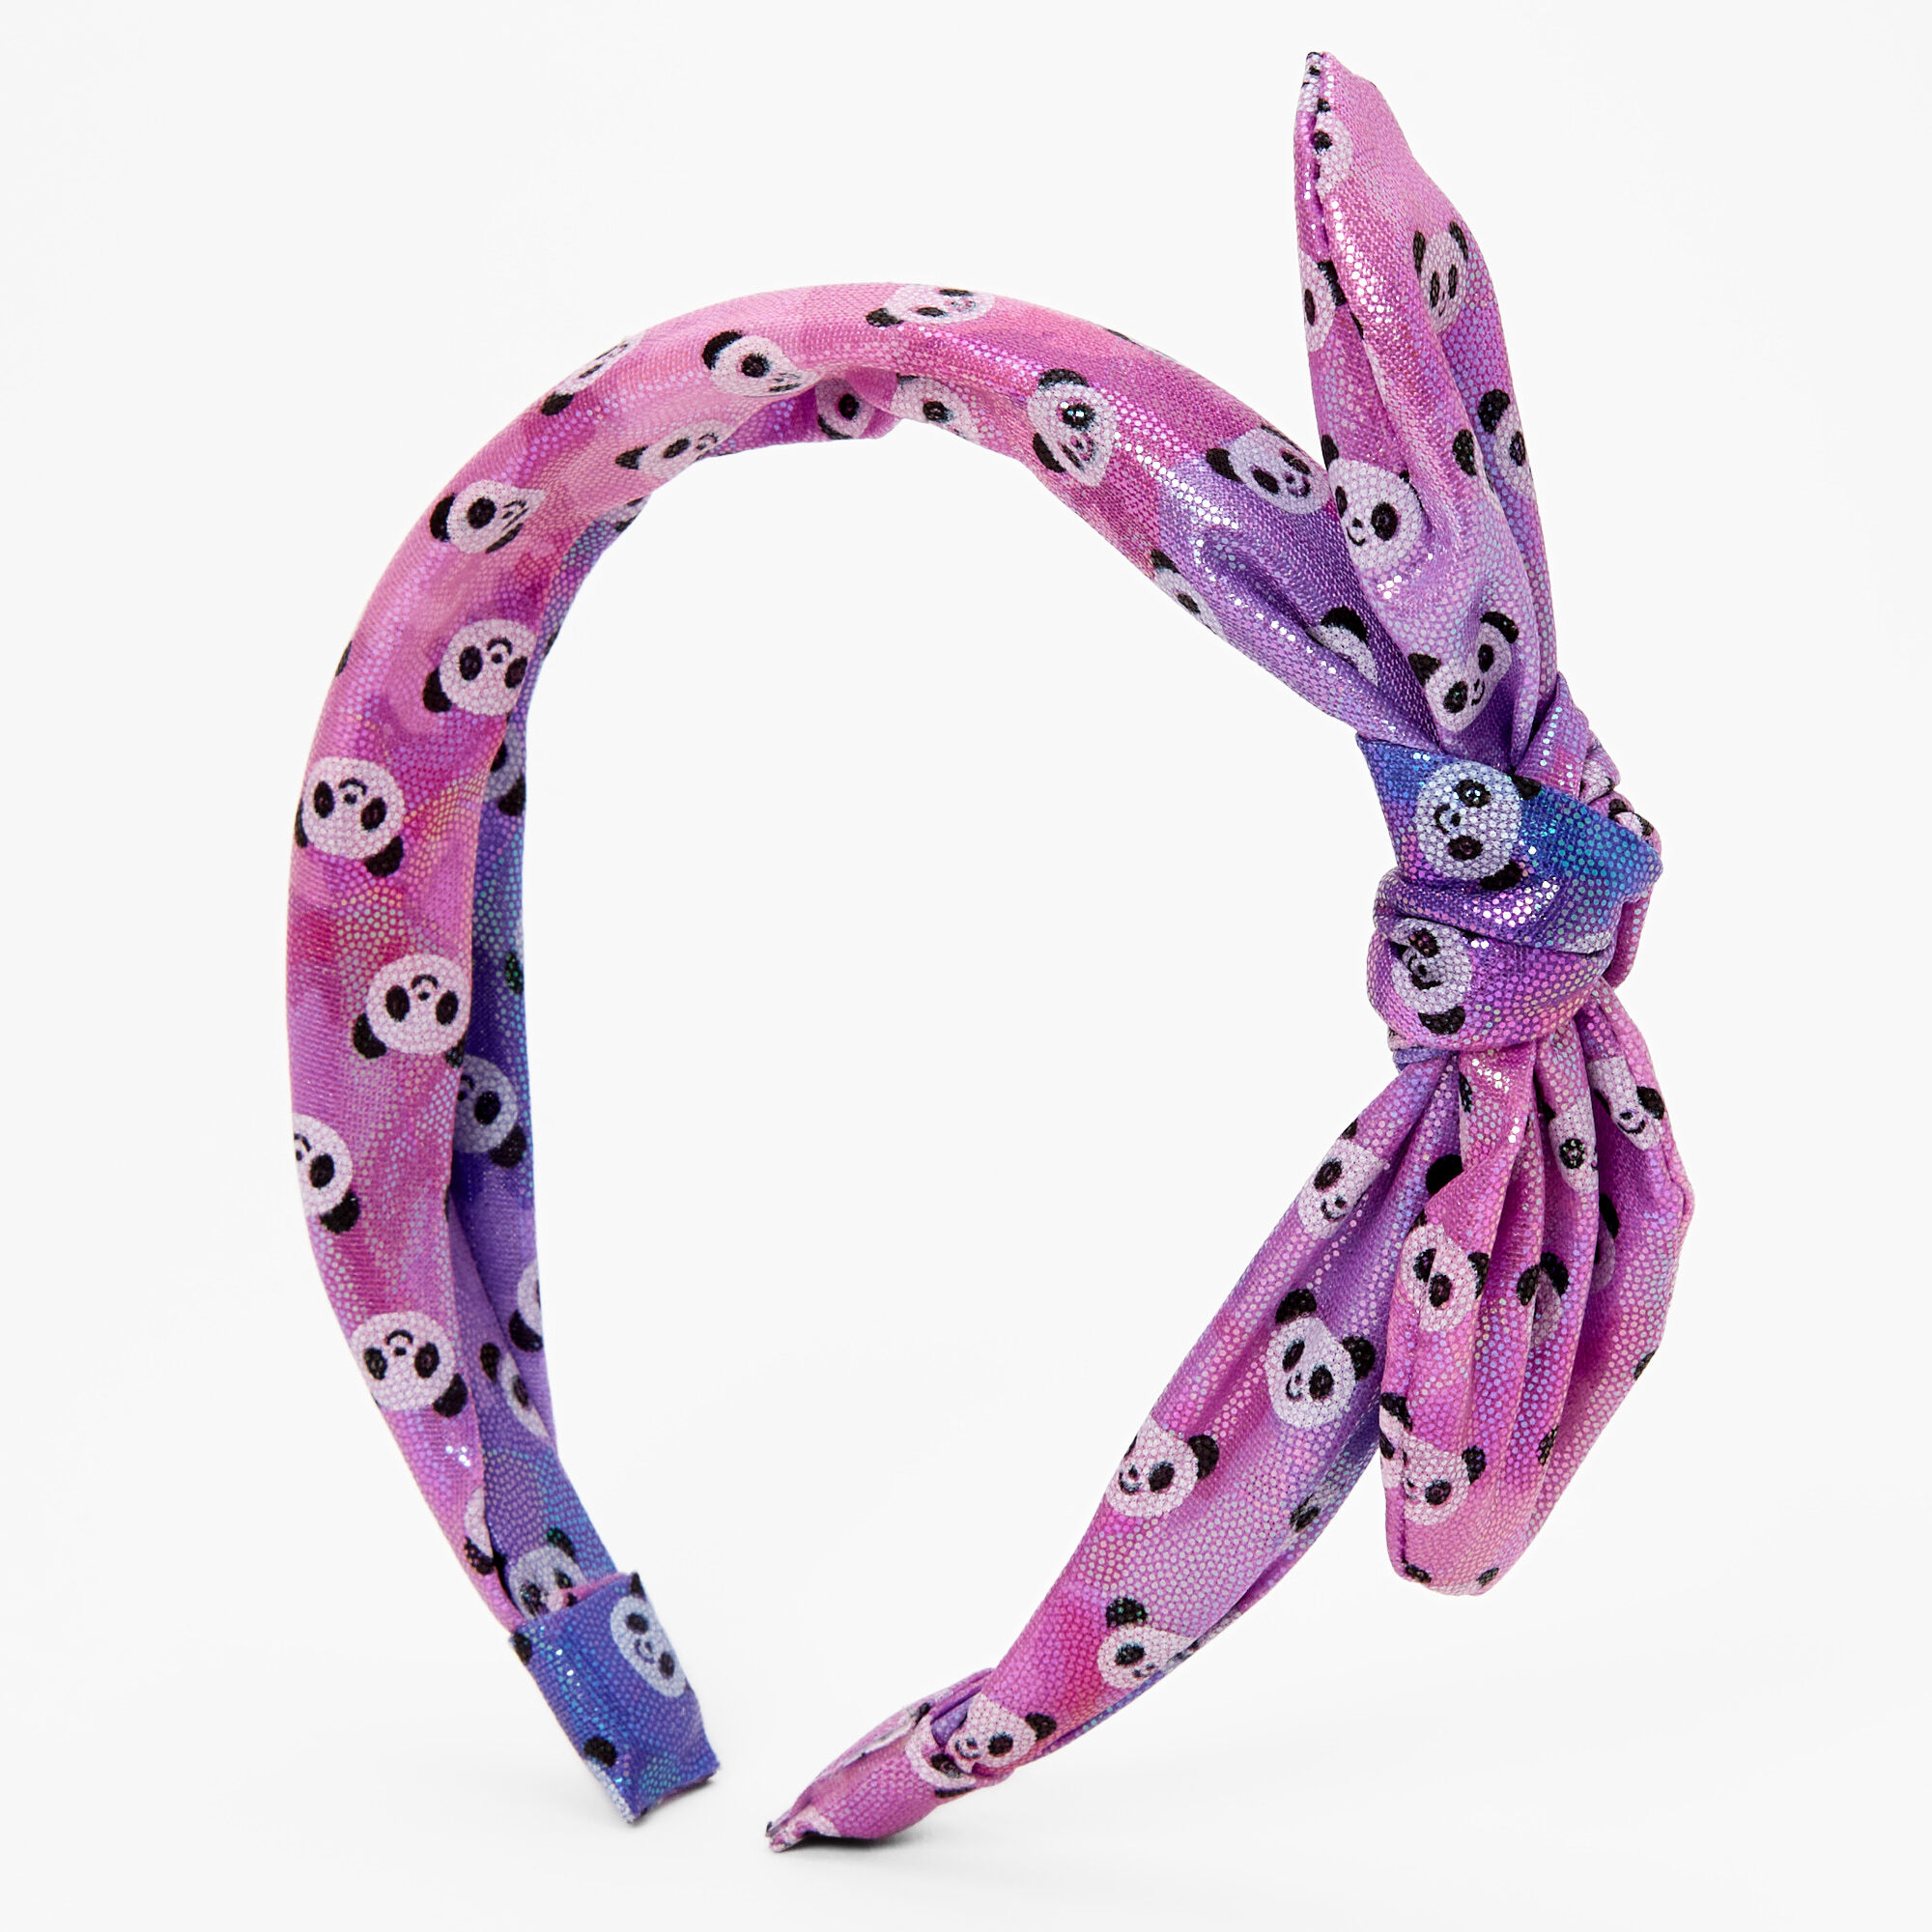 View Claires Anodized Panda Knotted Bow Headband Purple information